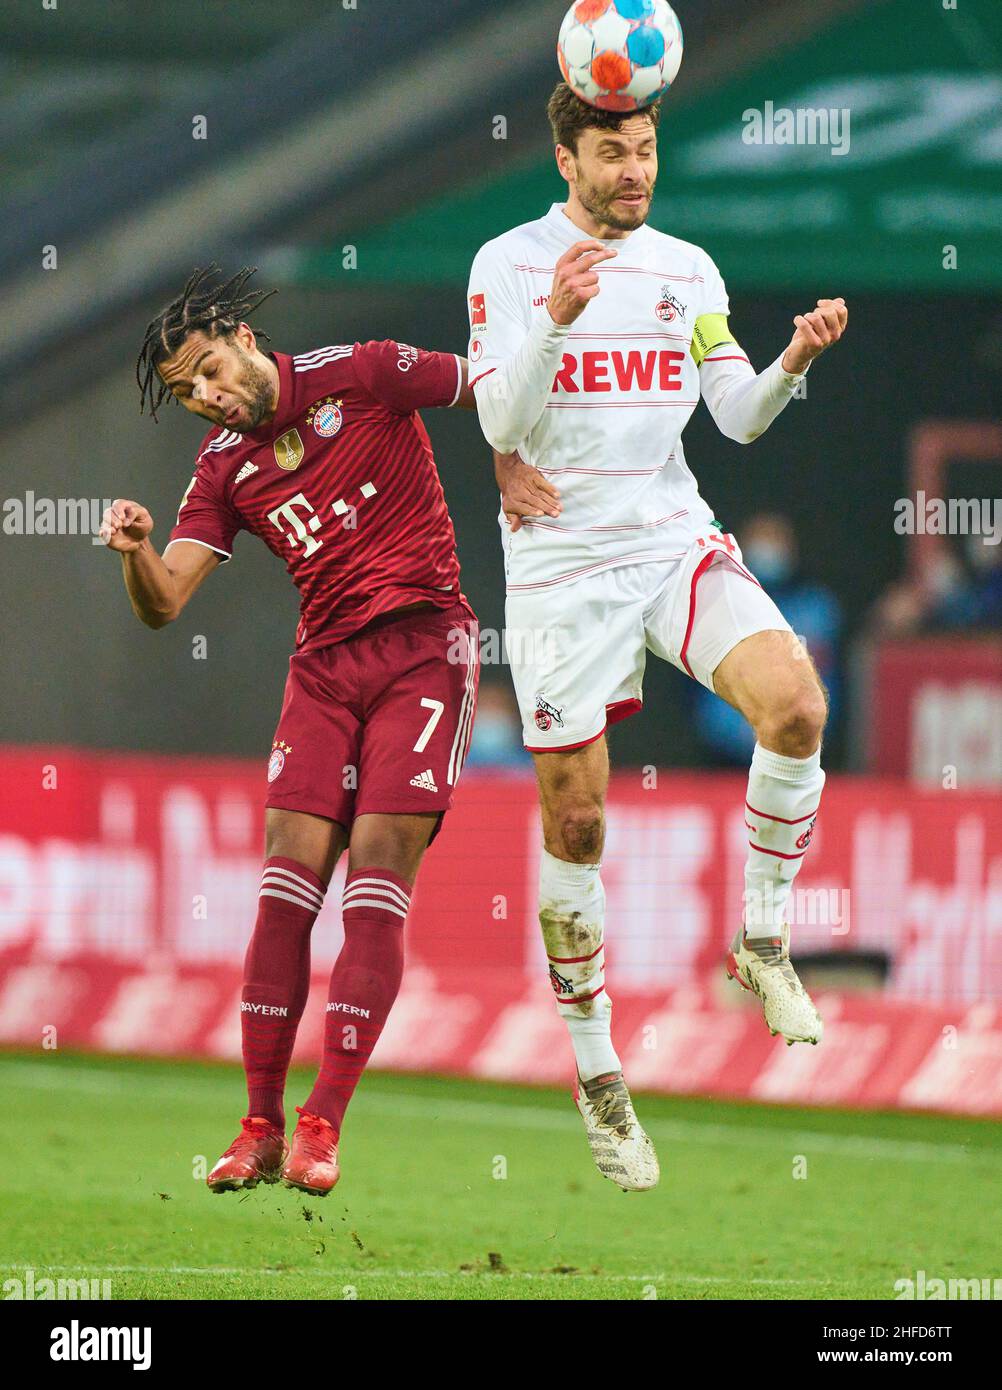 Jonas HECTOR, 1.FCK 14  compete for the ball, tackling, duel, header, zweikampf, action, fight against Serge GNABRY, FCB 7  in the match 1.FC KÖLN - FC BAYERN MÜNCHEN 0-4 1.German Football League on Jan 15, 2022 in Cologne, Germany  Season 2021/2022, matchday 19, 1.Bundesliga, 19.Spieltag,  © Peter Schatz / Alamy Live News    - DFL REGULATIONS PROHIBIT ANY USE OF PHOTOGRAPHS as IMAGE SEQUENCES and/or QUASI-VIDEO - Stock Photo